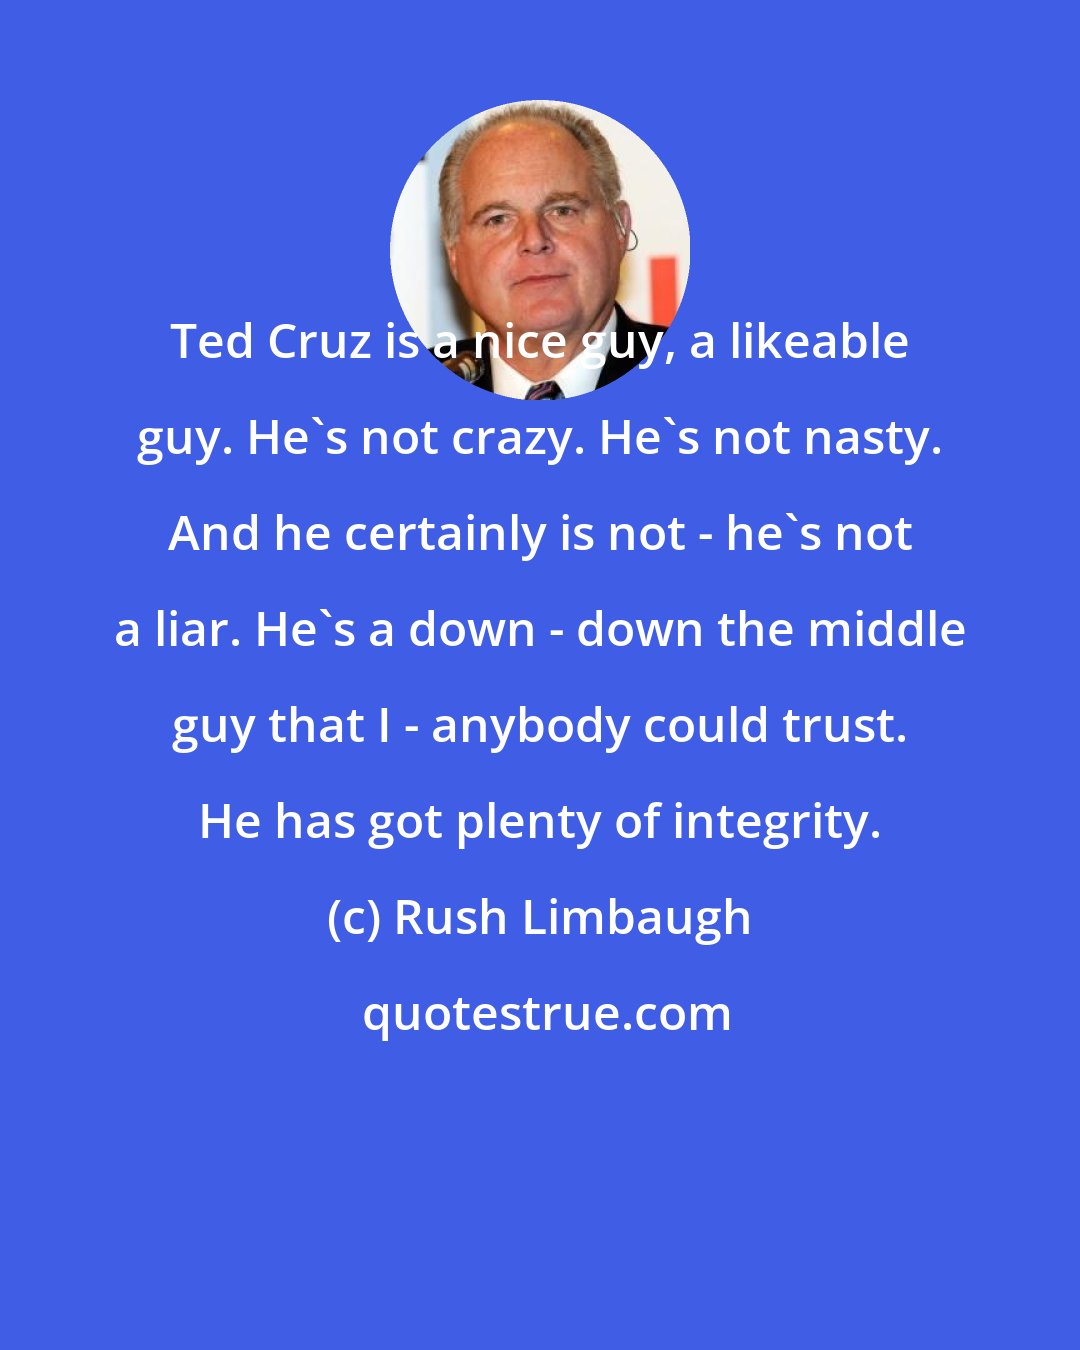 Rush Limbaugh: Ted Cruz is a nice guy, a likeable guy. He's not crazy. He's not nasty. And he certainly is not - he's not a liar. He's a down - down the middle guy that I - anybody could trust. He has got plenty of integrity.